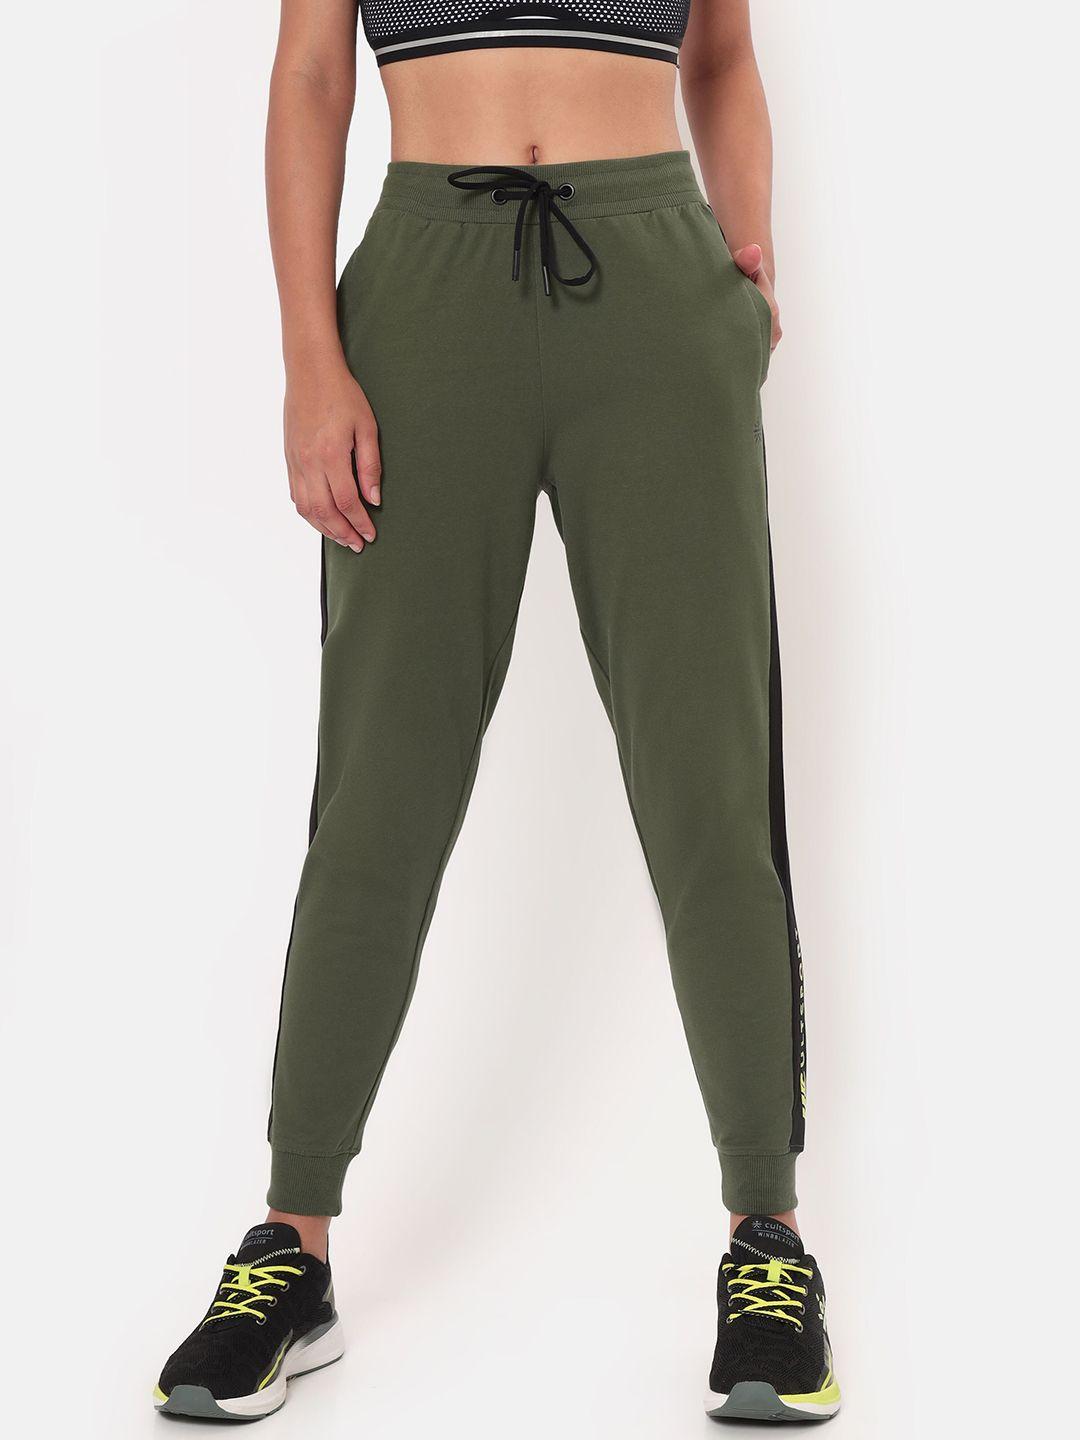 cultsport-women-olive-green-solid-cotton-joggers